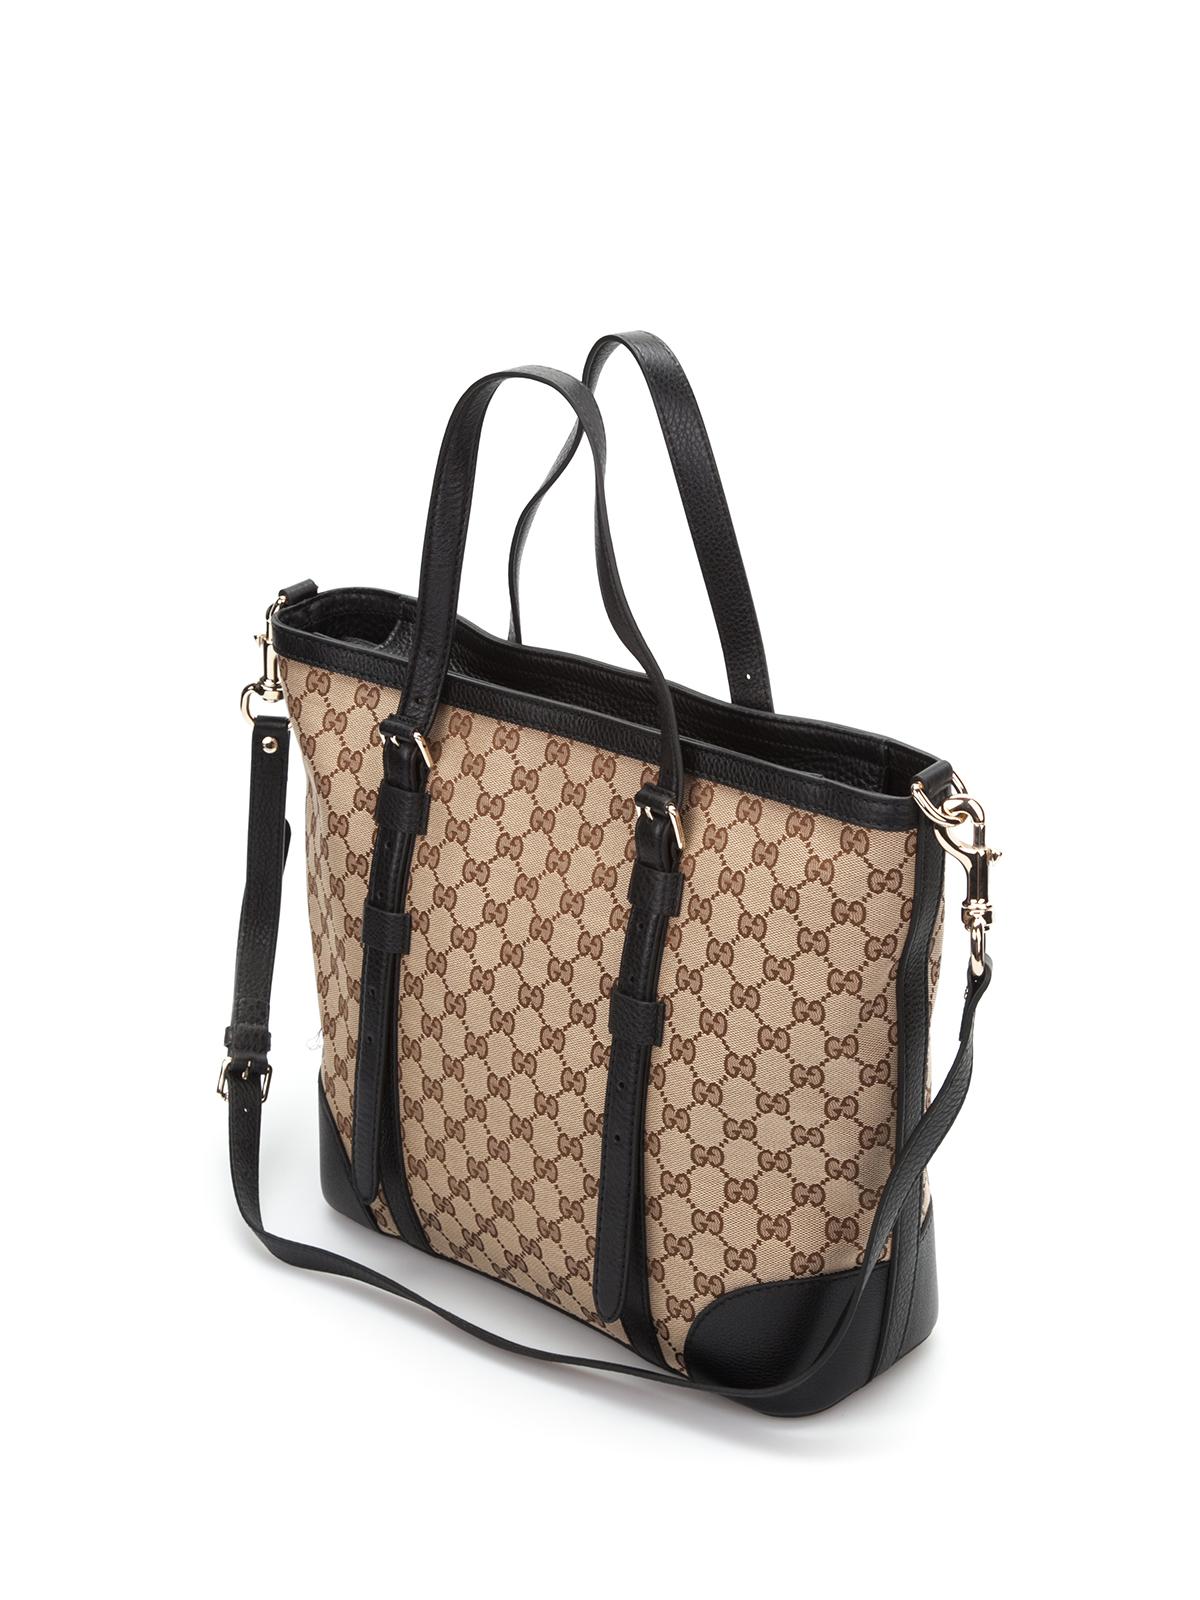 Gucci - GG classic tote - totes bags - 387602KQW1G9769 | www.lvbagssale.com